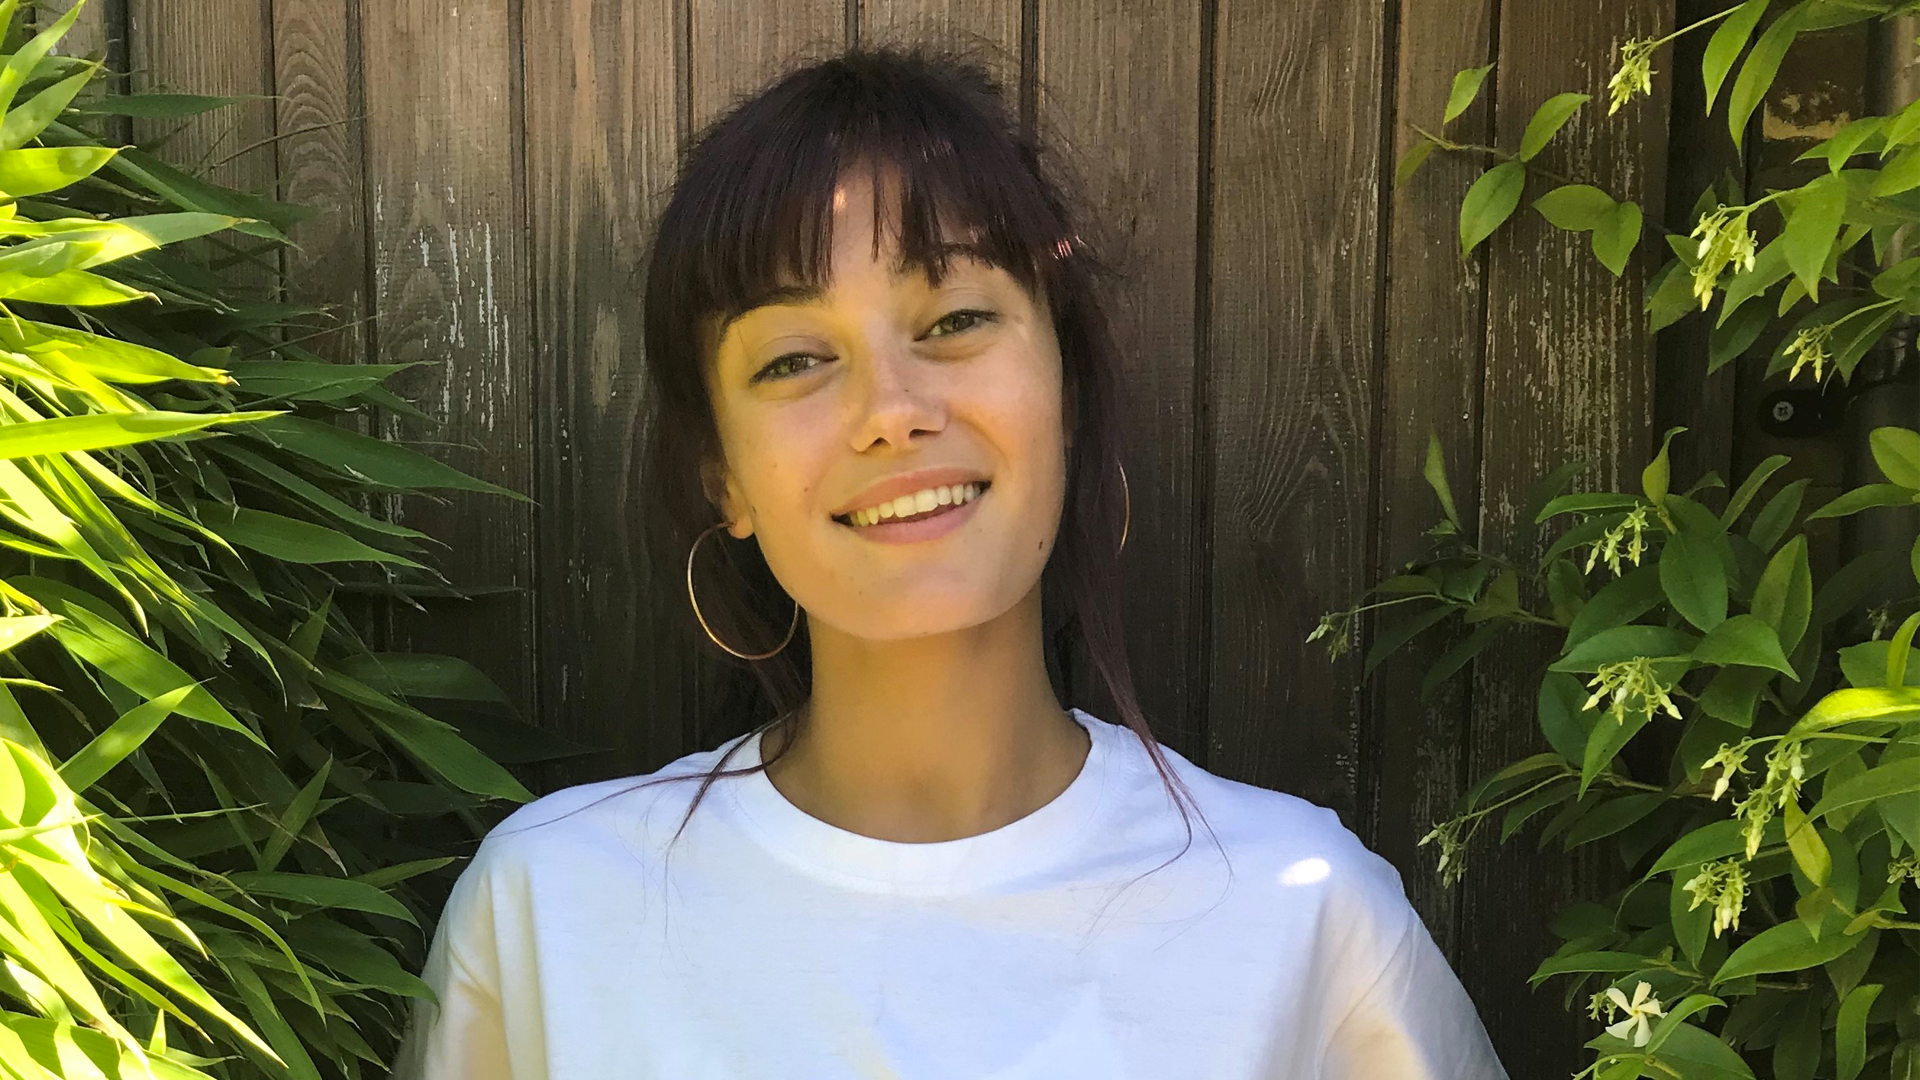 Ella Purnell smiling and wearing a white T-shirt in the garden